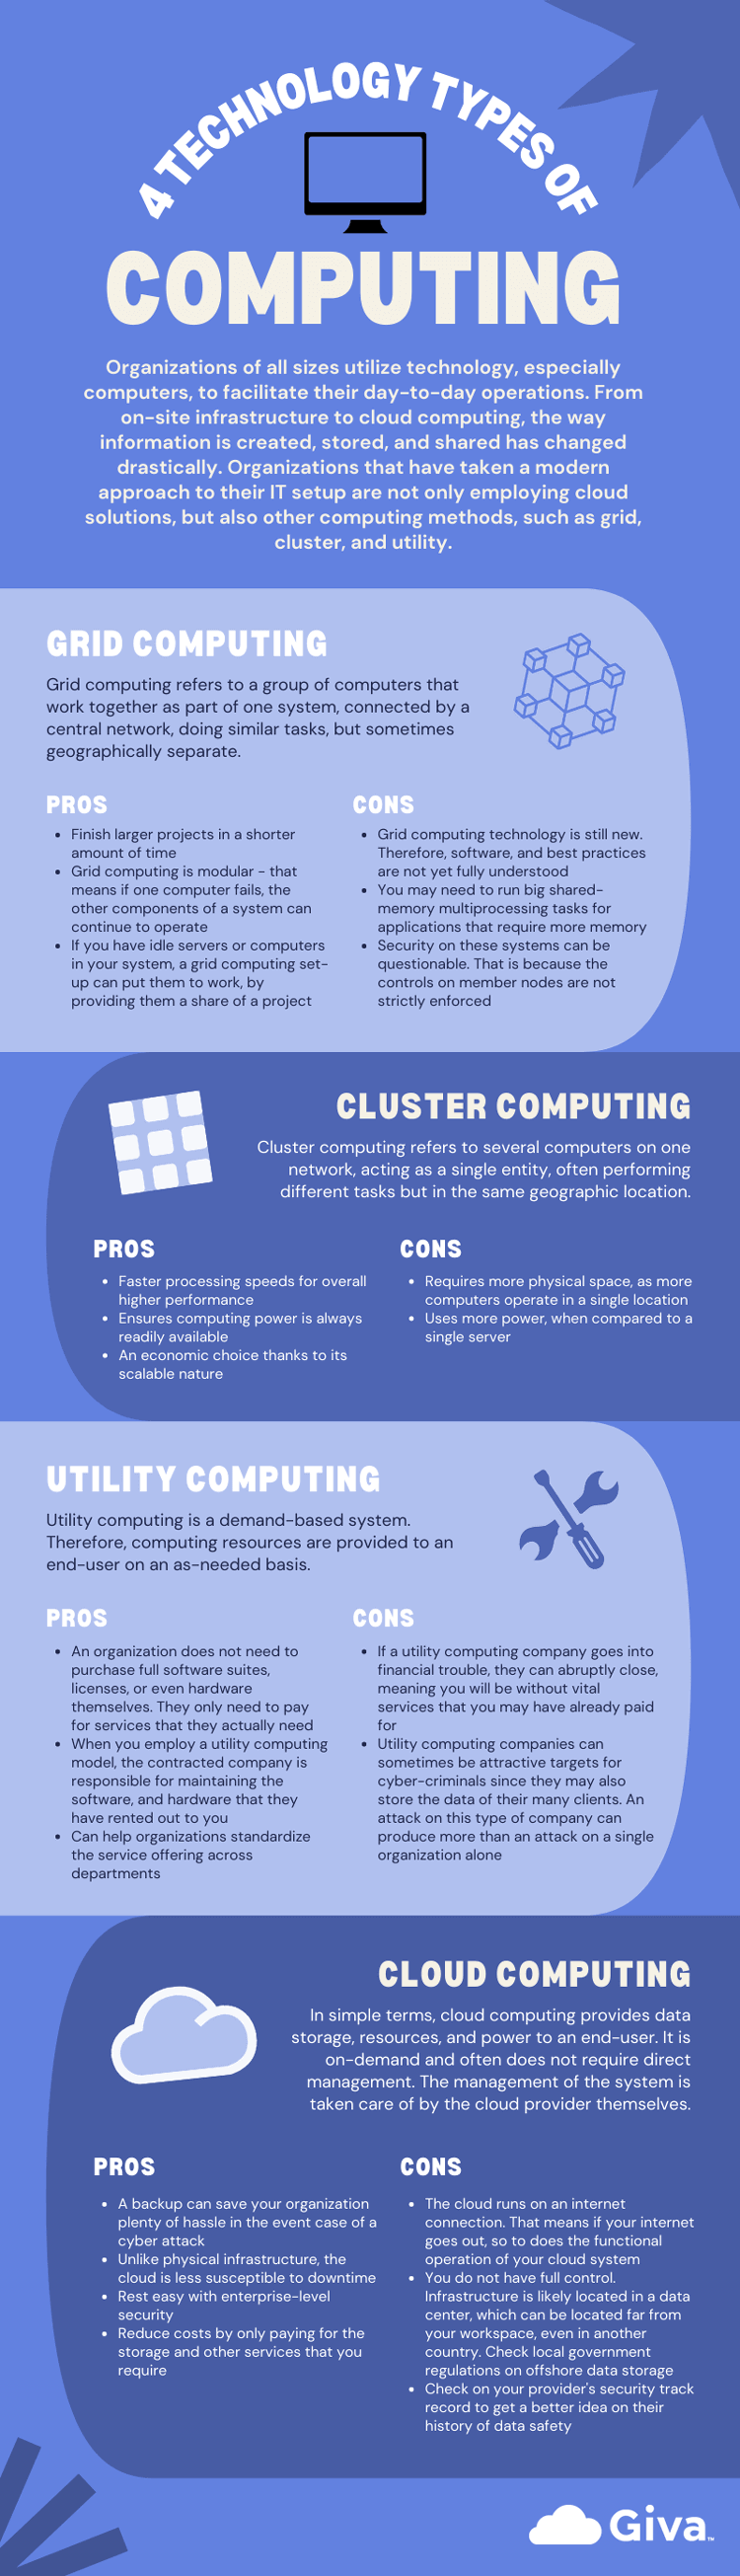 Grid Cluster Utility Cloud Computing Infographic